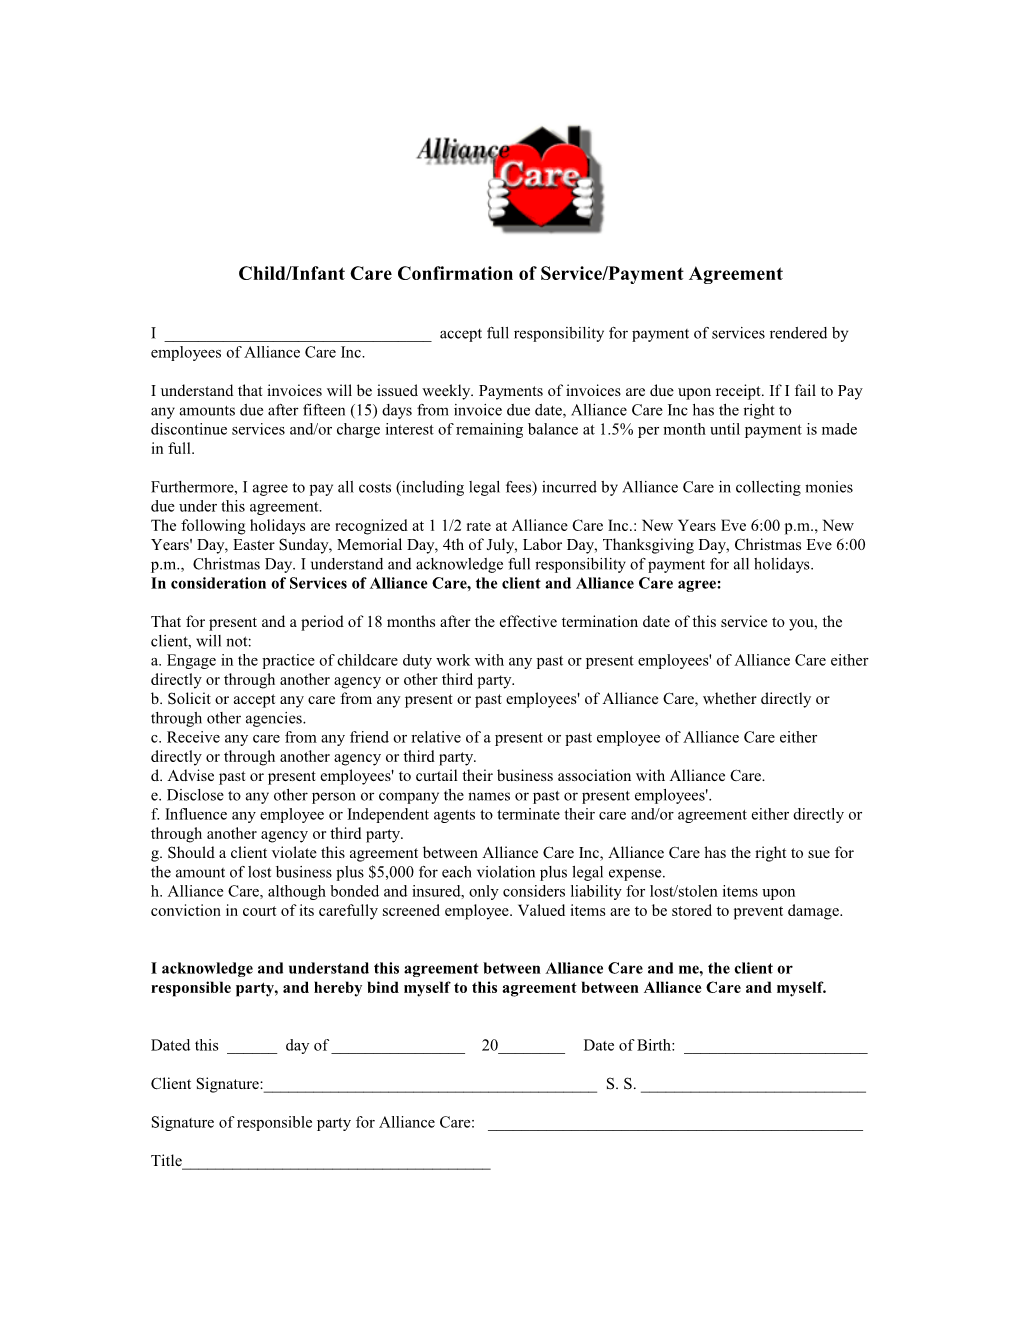 Childcare Confirmation of Service/Payment Agreement